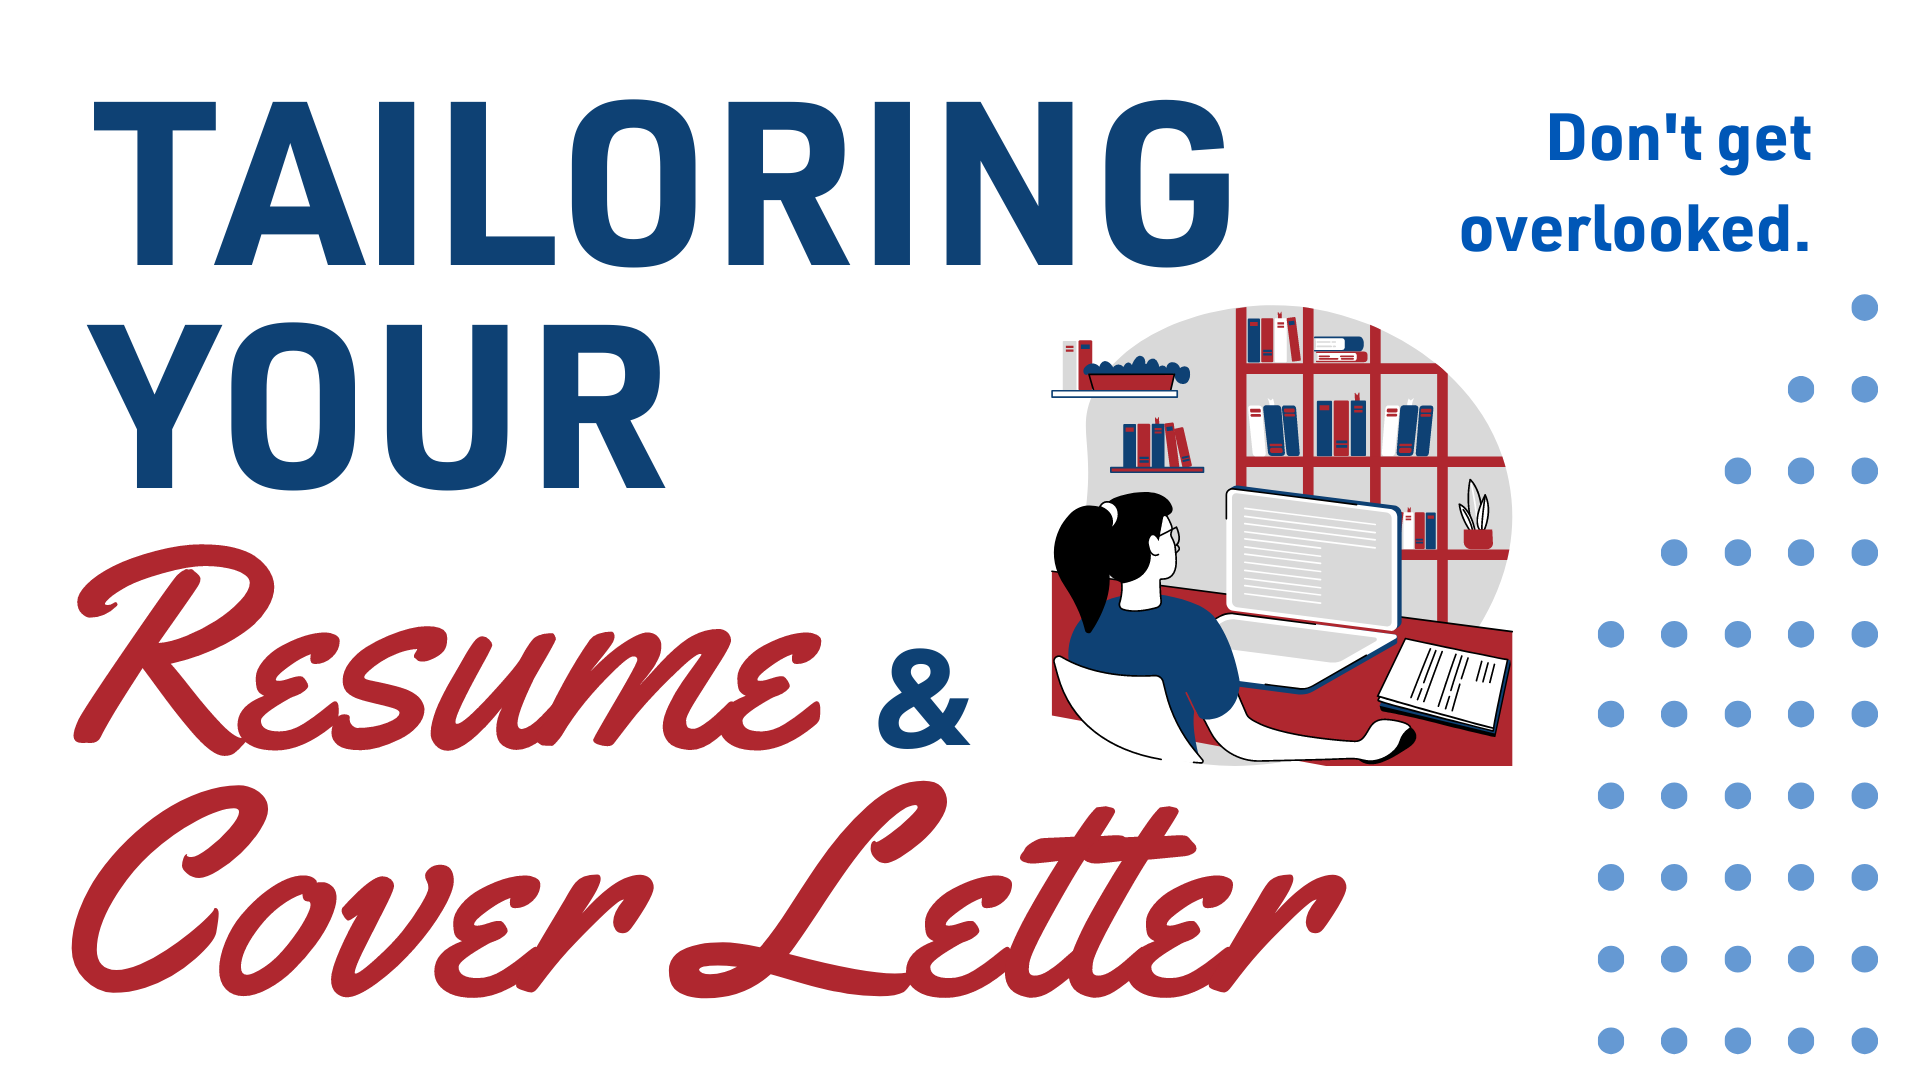 Tailoring your resume and cover letter